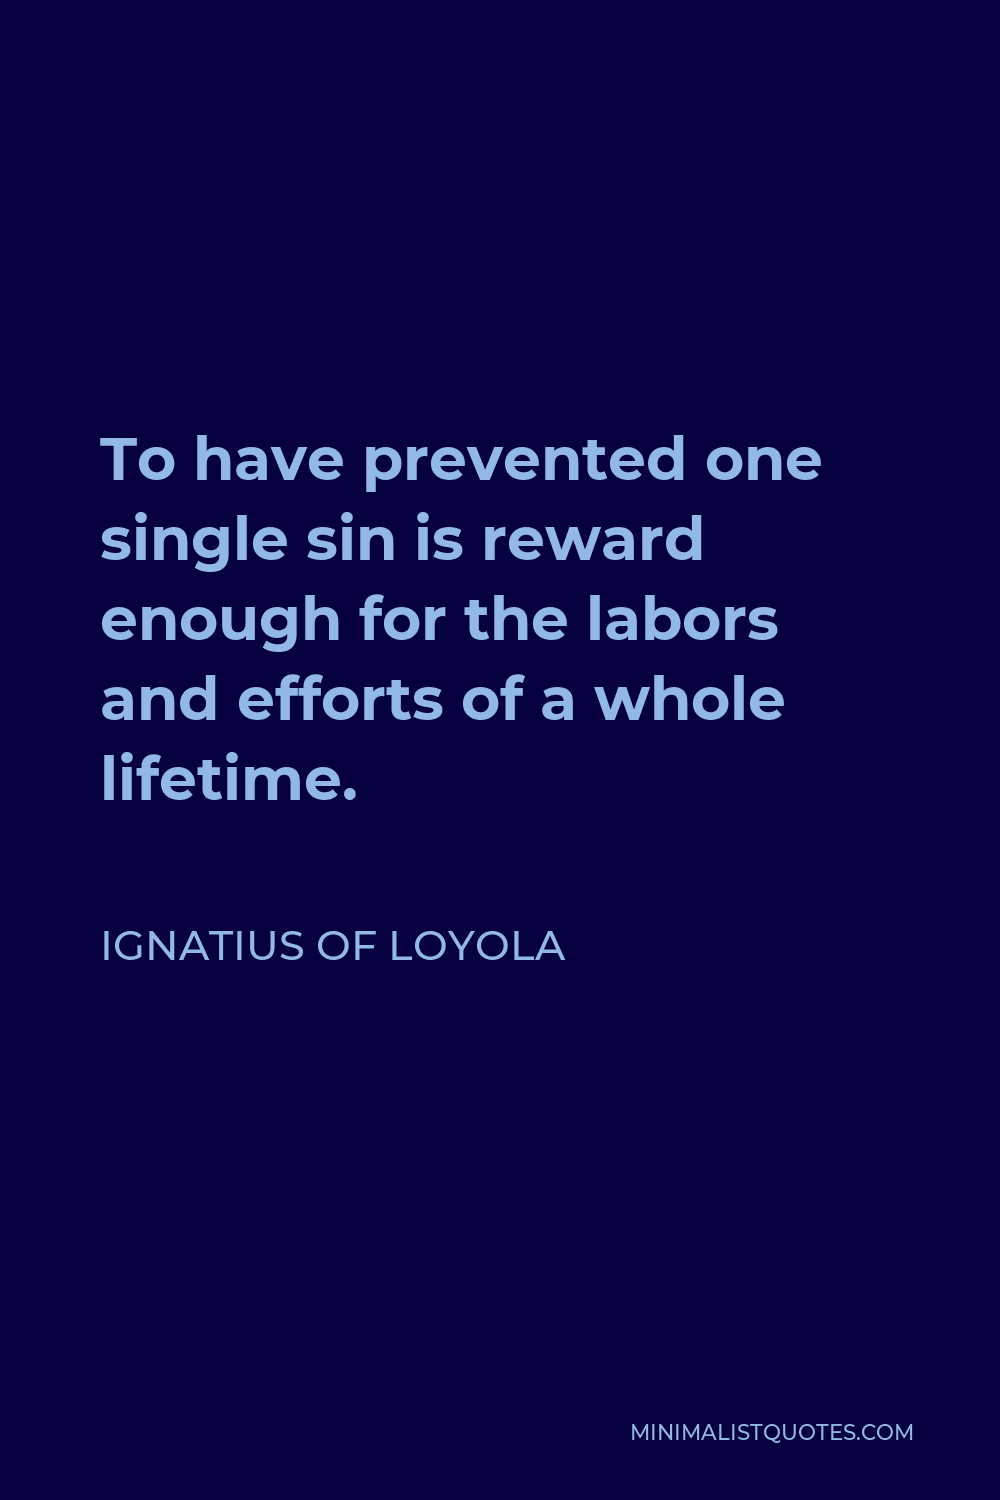 Ignatius of Loyola Quote - To have prevented one single sin is reward enough for the labors and efforts of a whole lifetime.